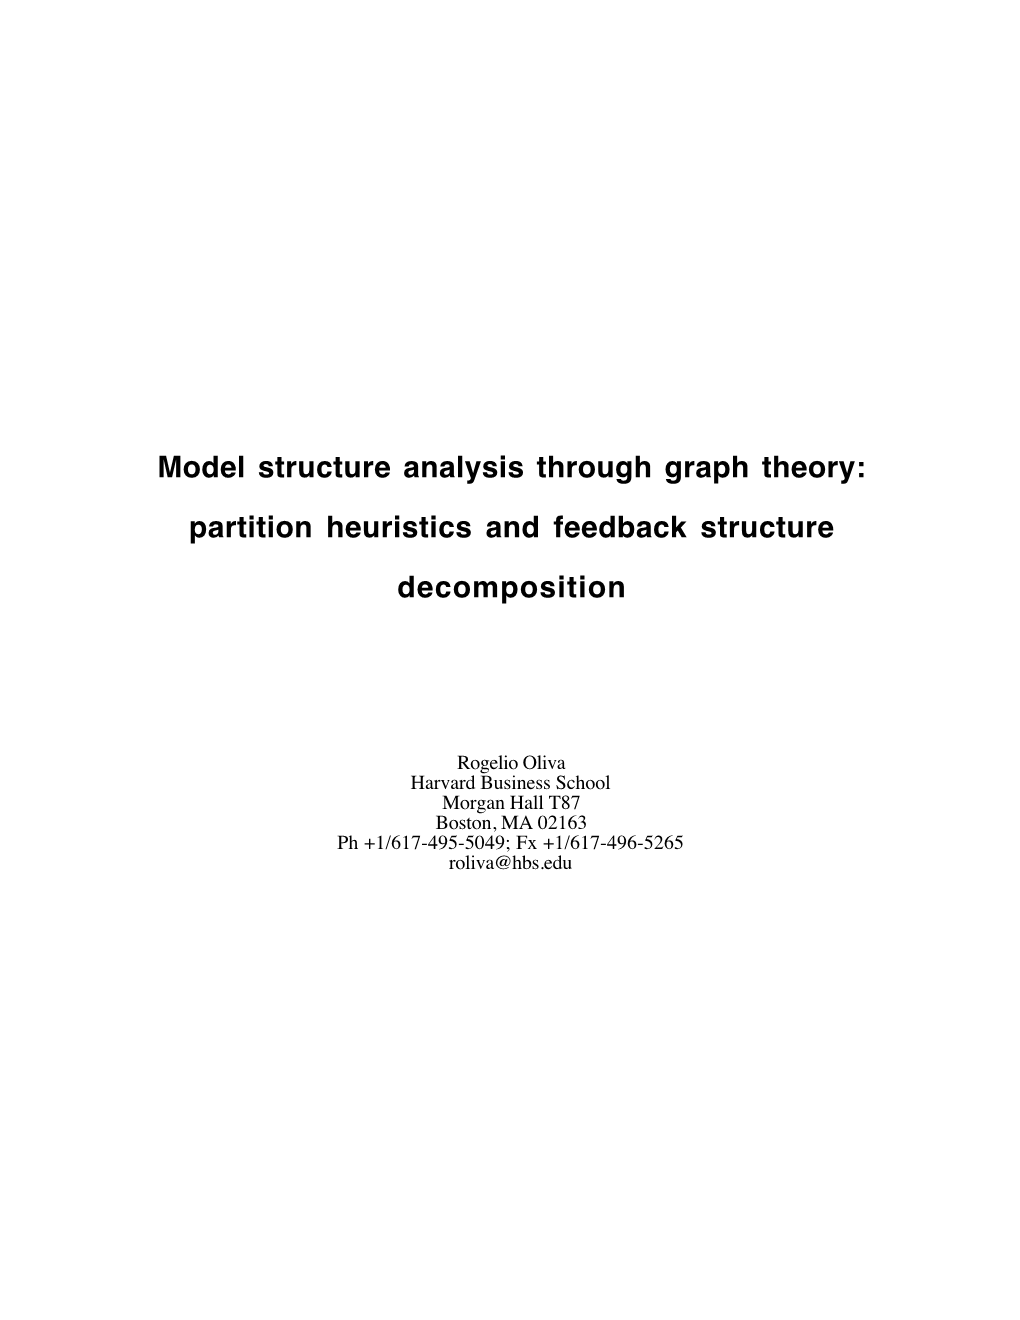 Model Structure Analysis Through Graph Theory: Partition Heuristics and Feedback Structure Decomposition